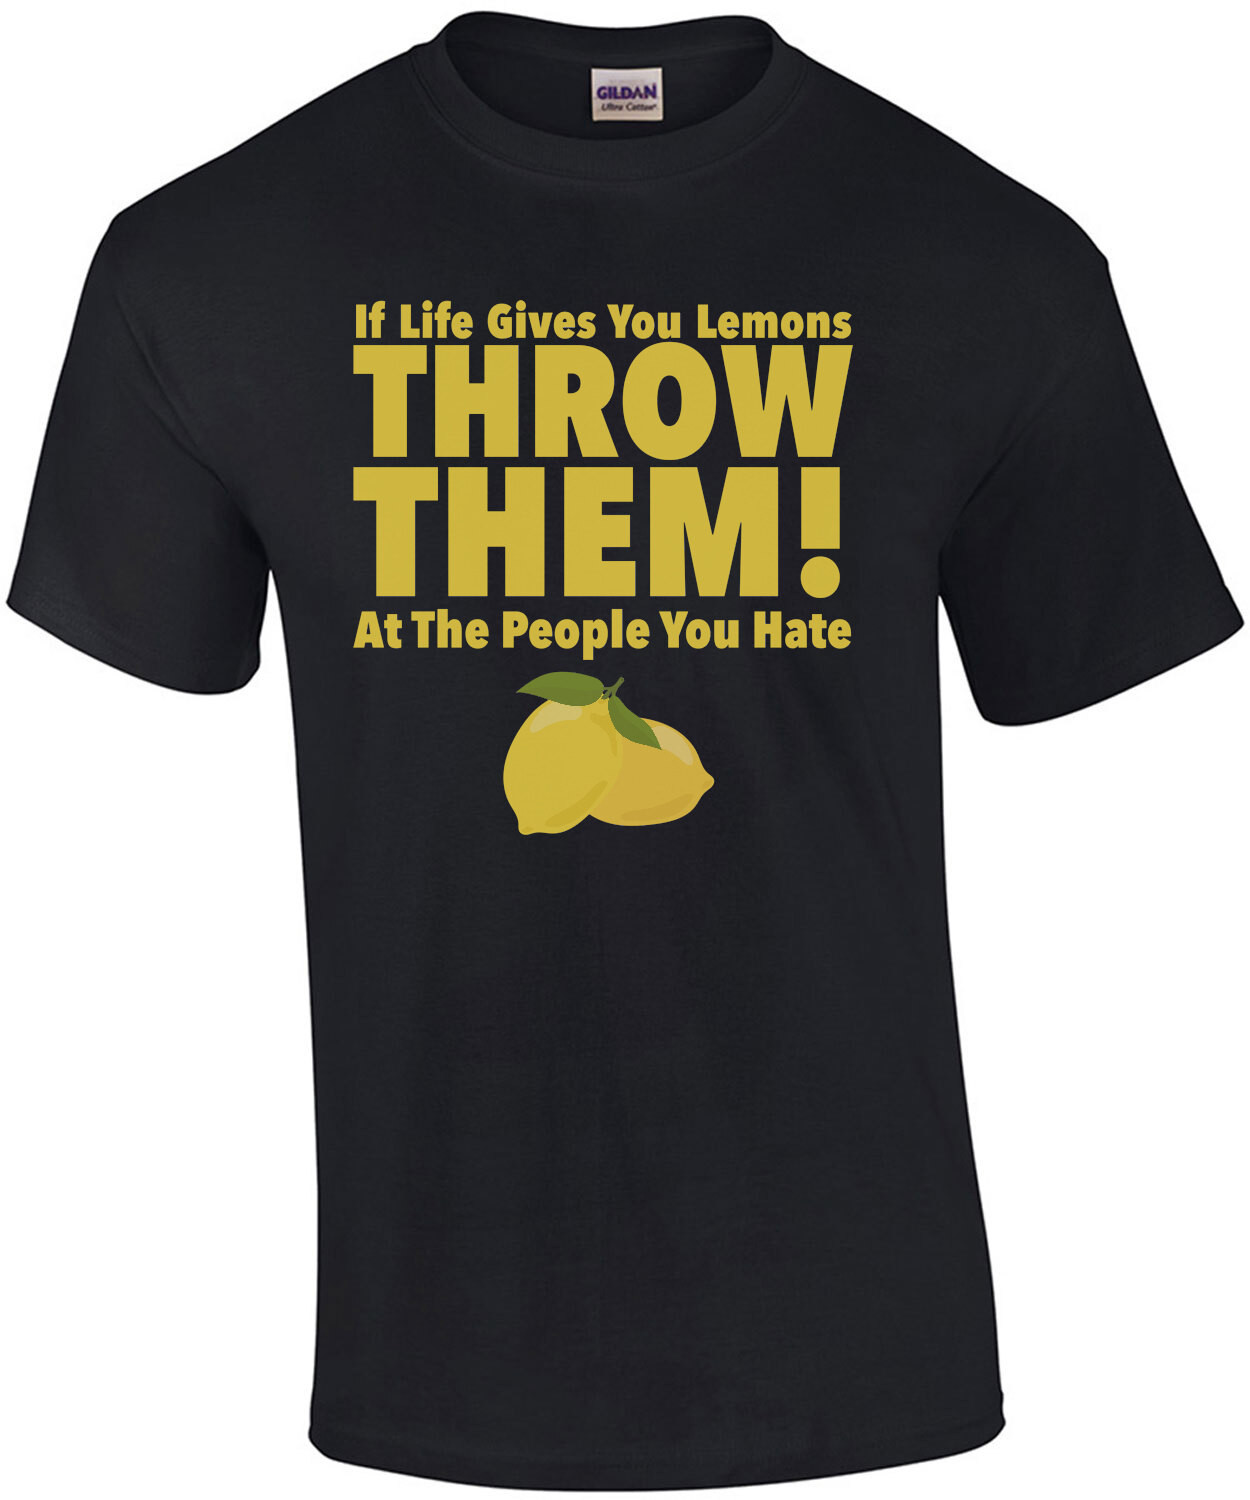 If life gives you lemons throw them at people you hate - funny t-shirt